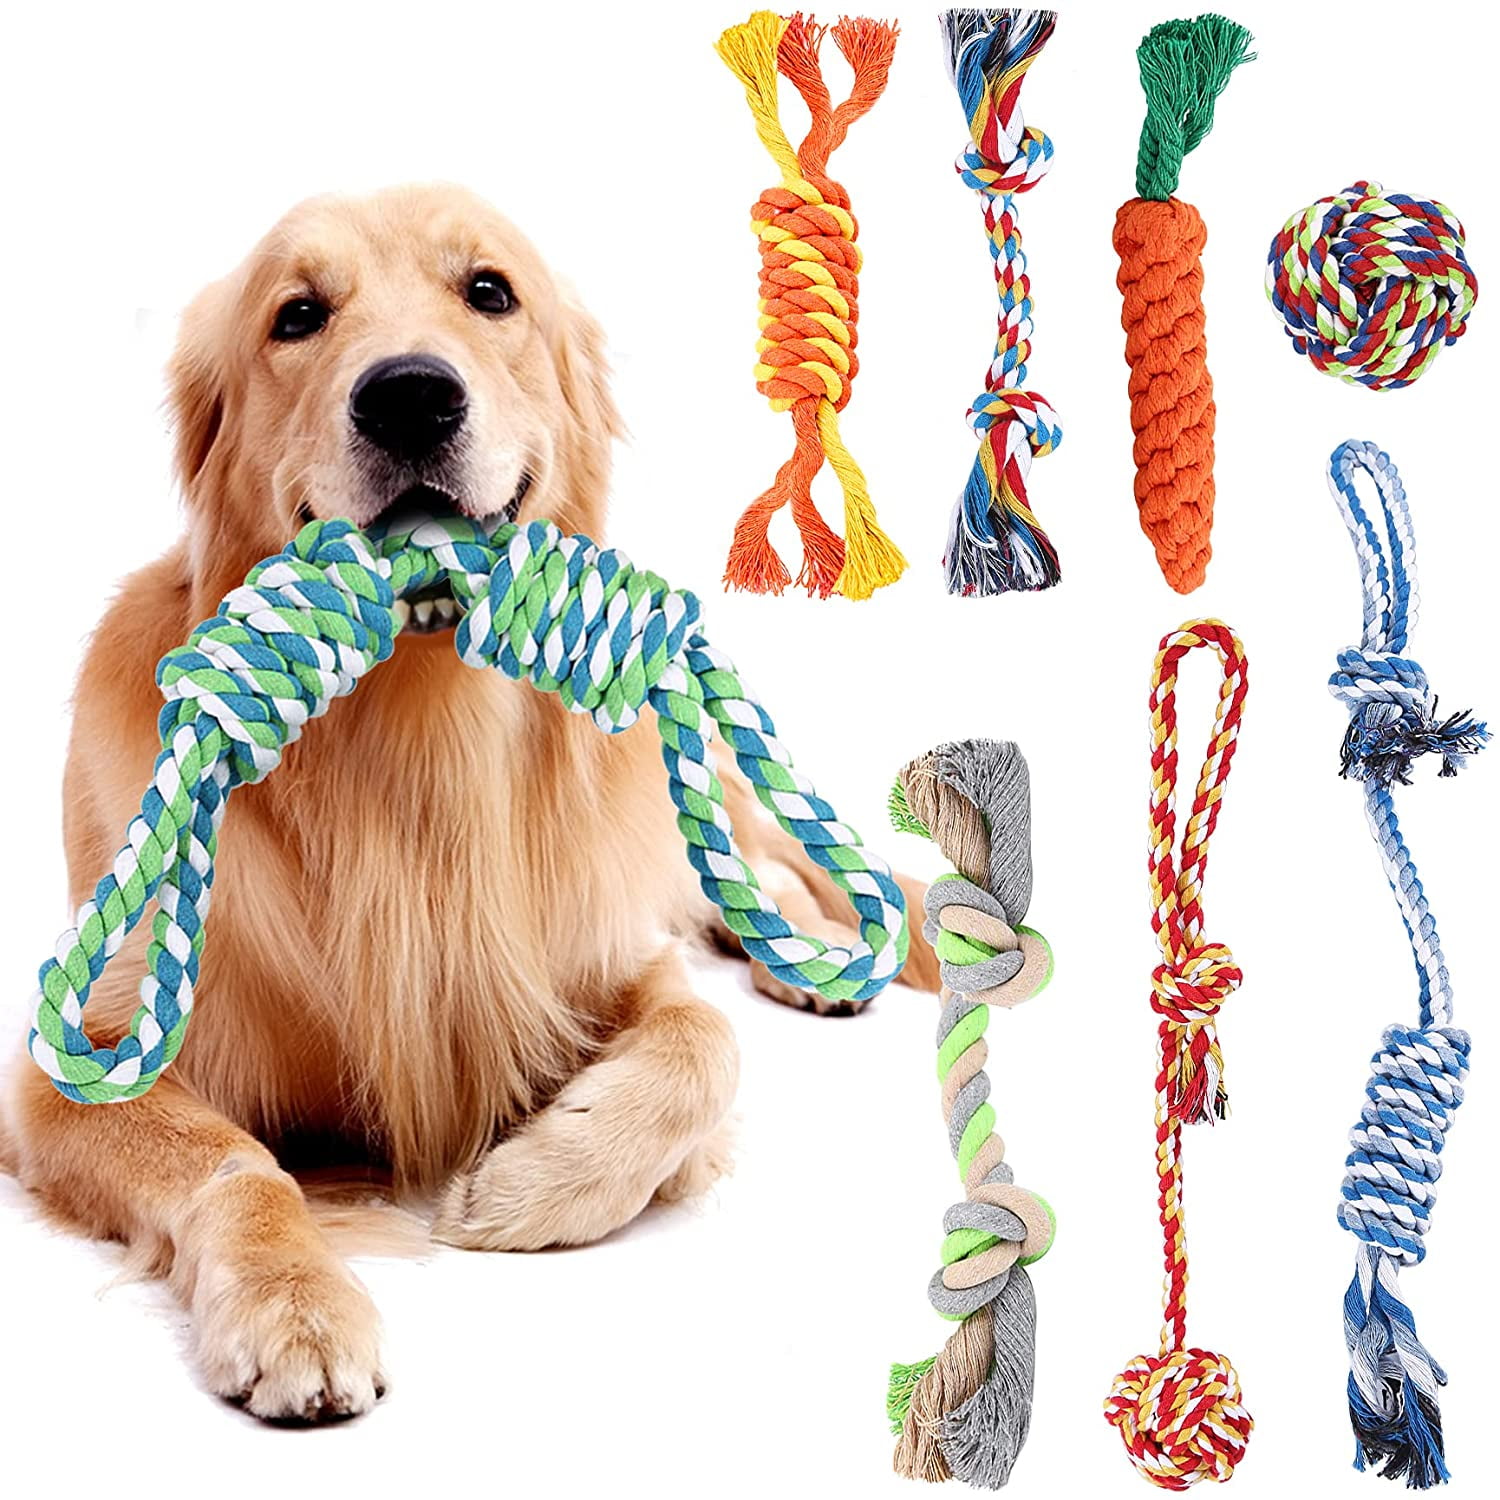 Voovpet Dog Toys for Small Dogs Rope Toys for Dogs Chew Toy Cute